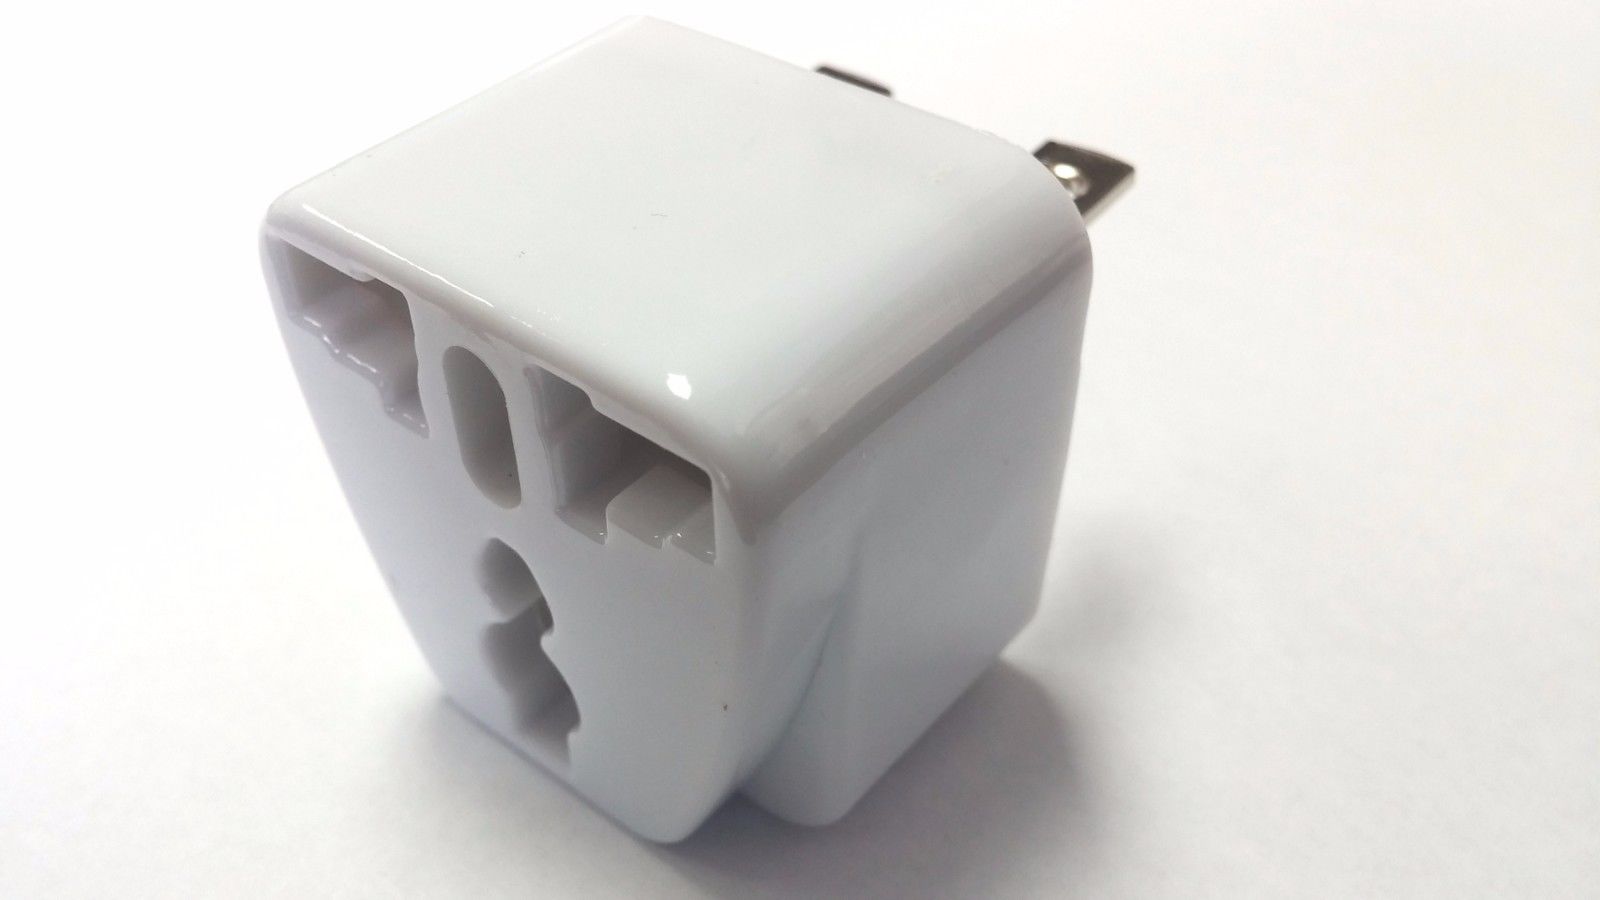 Details about   Natunohana Multi-Conversion Plug Universal Outlet Transformer White 